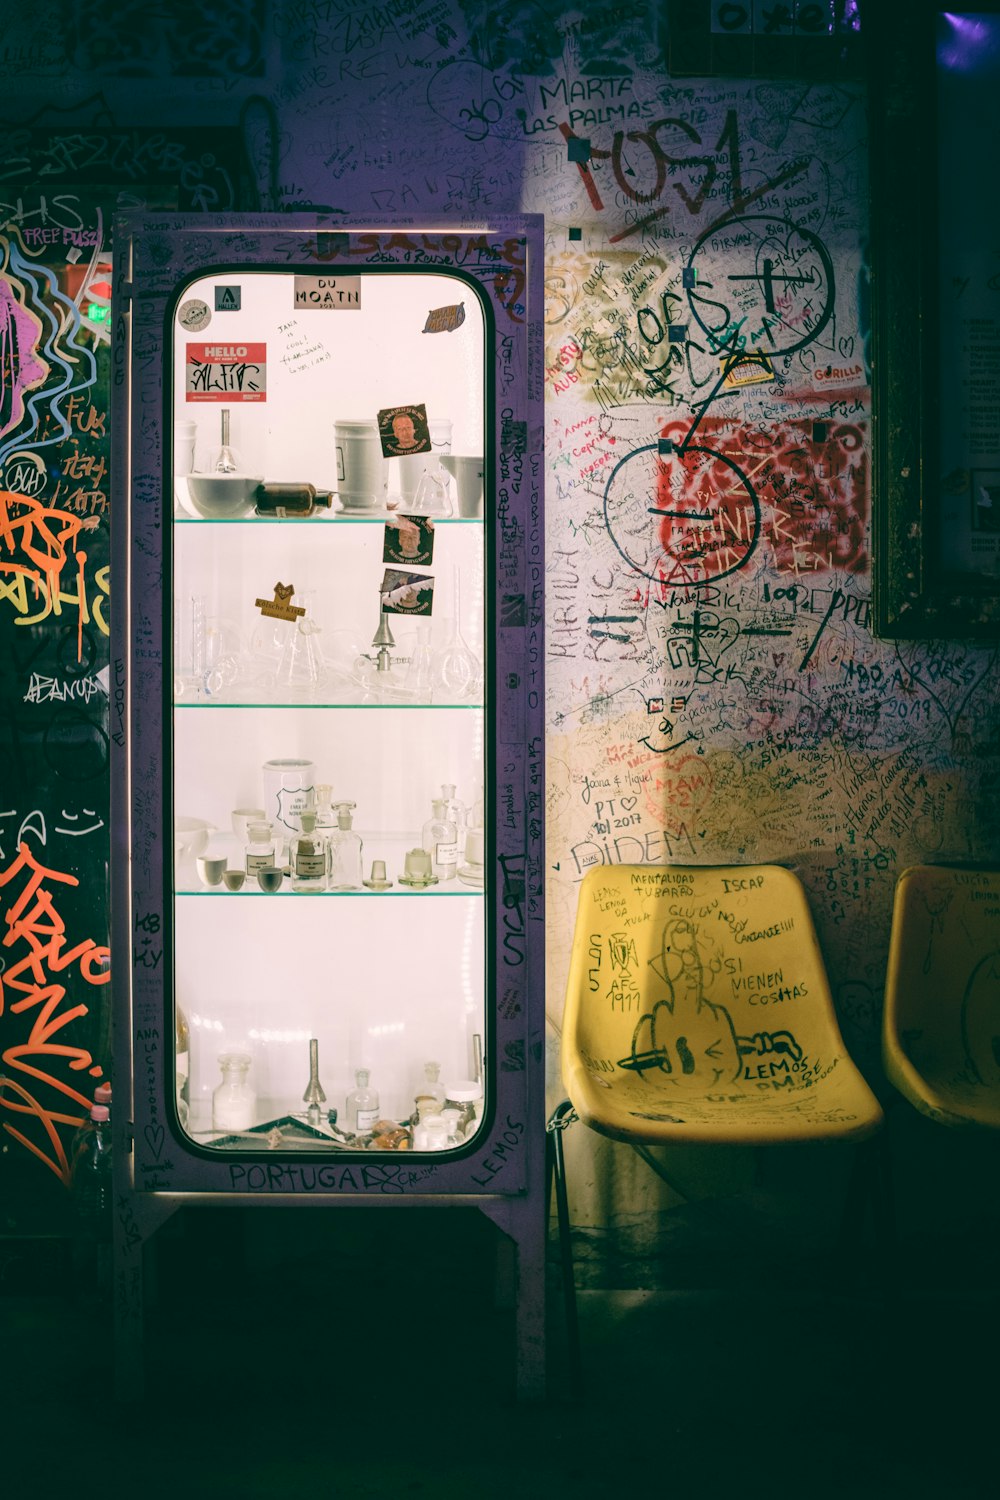 a refrigerator sitting in front of a wall covered in graffiti